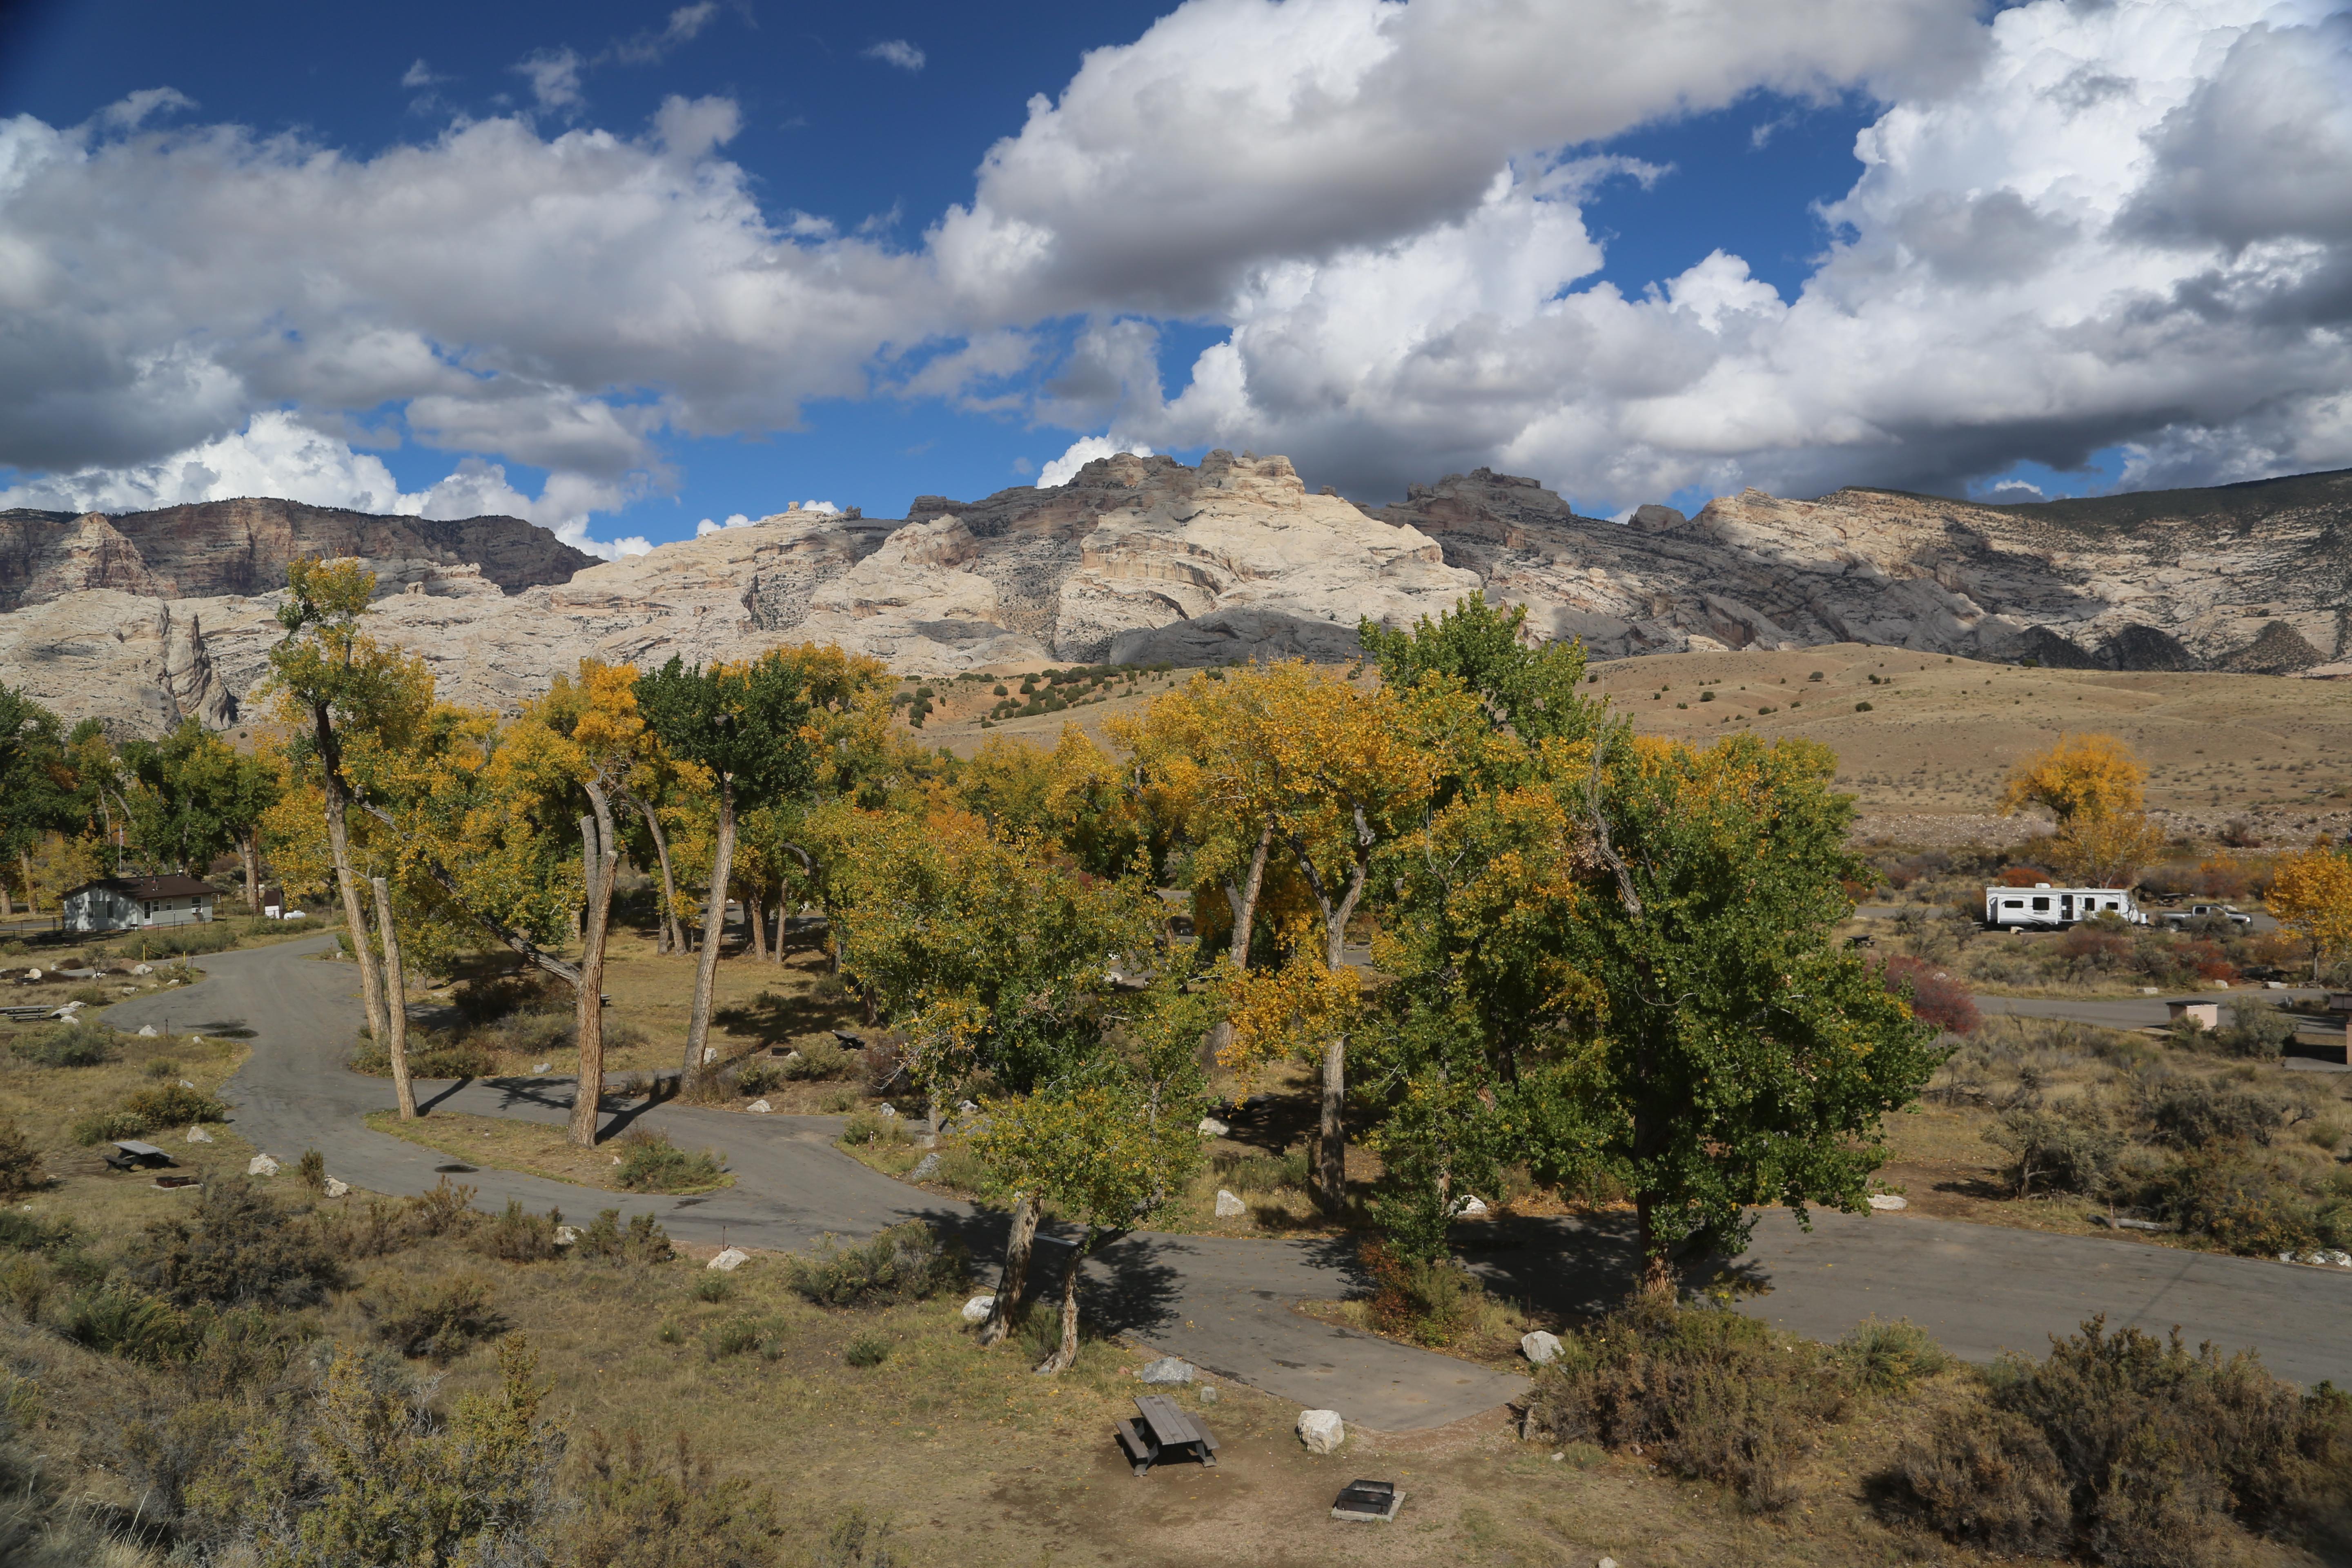 Trees with yellow leaves stand above campsites with a rocky mountain in the background.